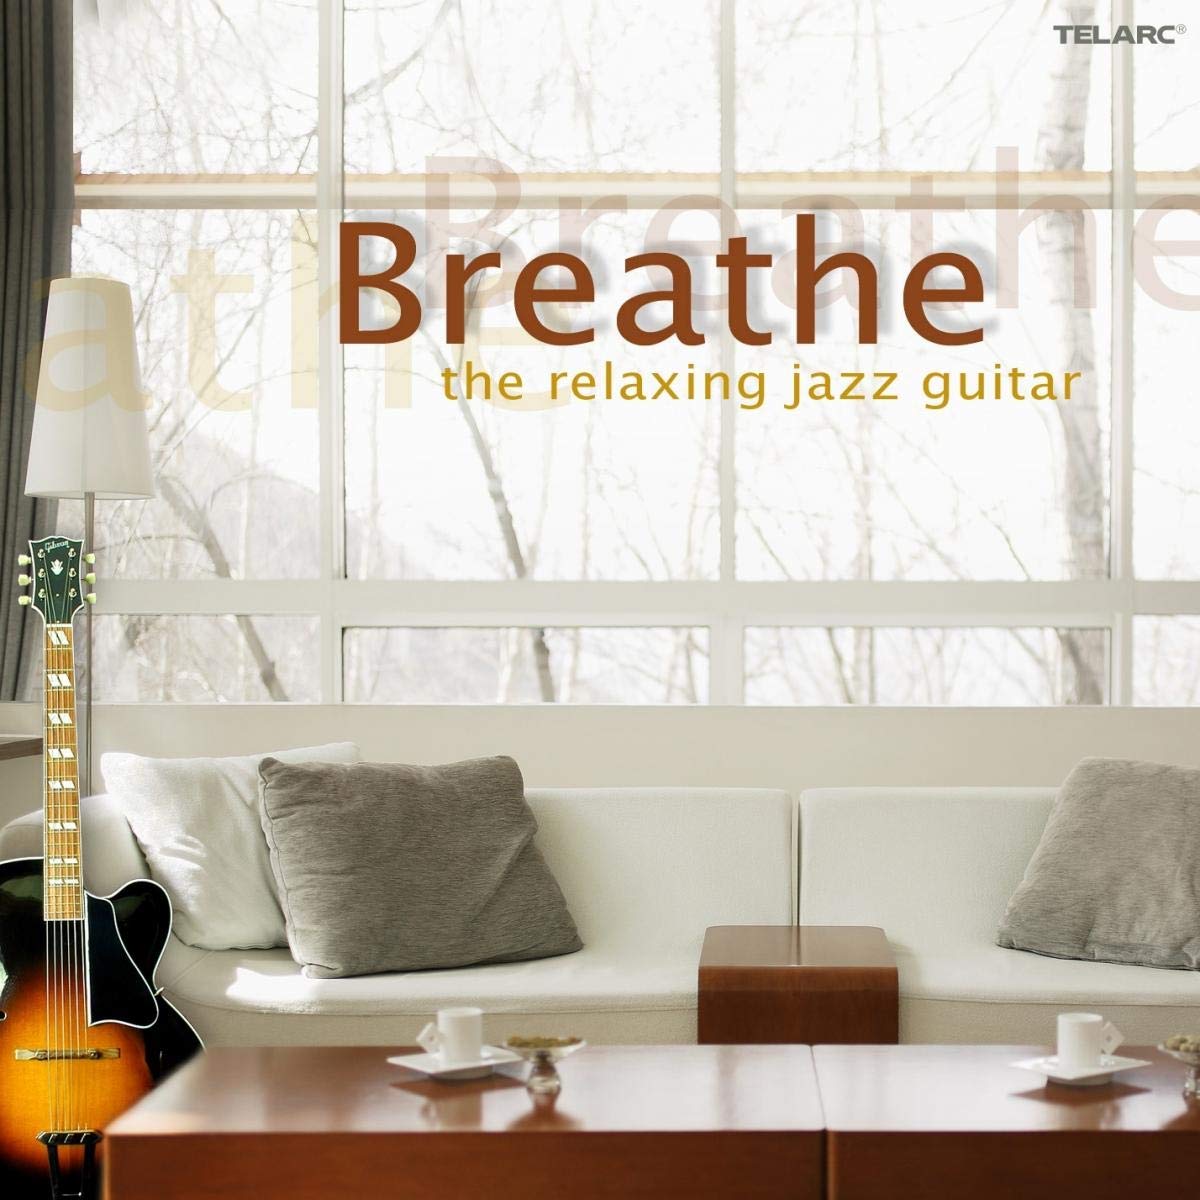 Breathe: The Relaxing Jazz Guitar - Jim Hall, Russell Malone, Al Di Meola, John Pizzarelli and more